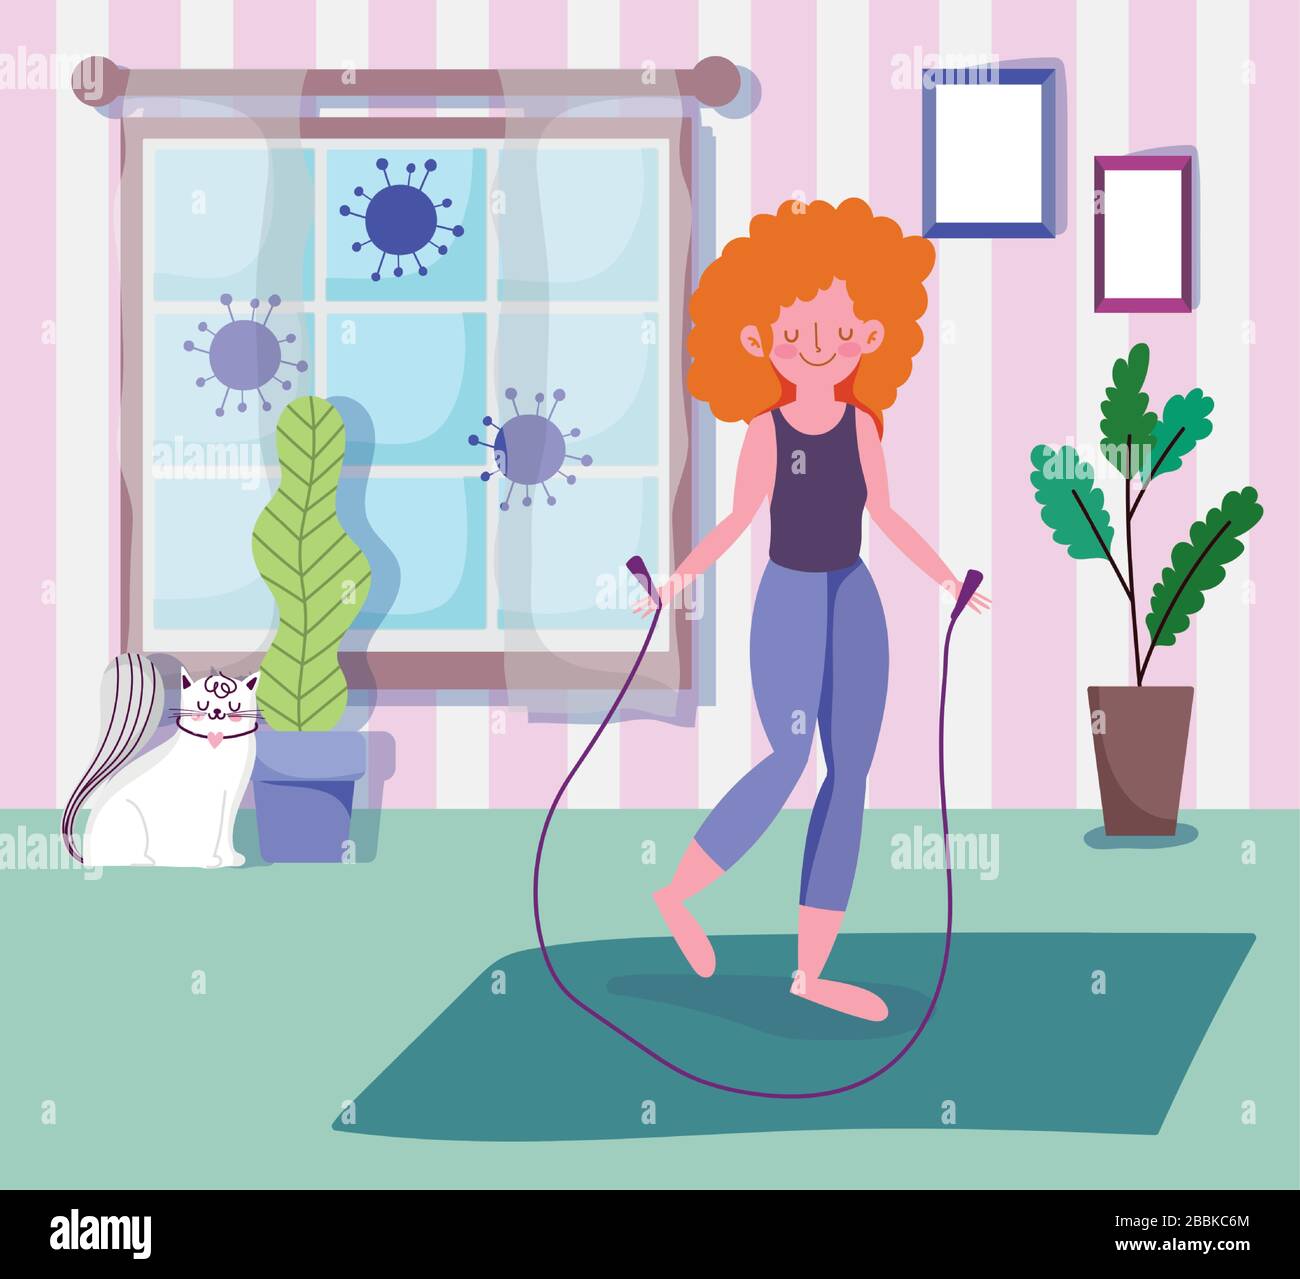 https://c8.alamy.com/comp/2BBKC6M/young-woman-with-jumping-rope-in-room-with-window-activity-sport-exercise-at-home-vector-illustration-covid-19-pandemic-2BBKC6M.jpg